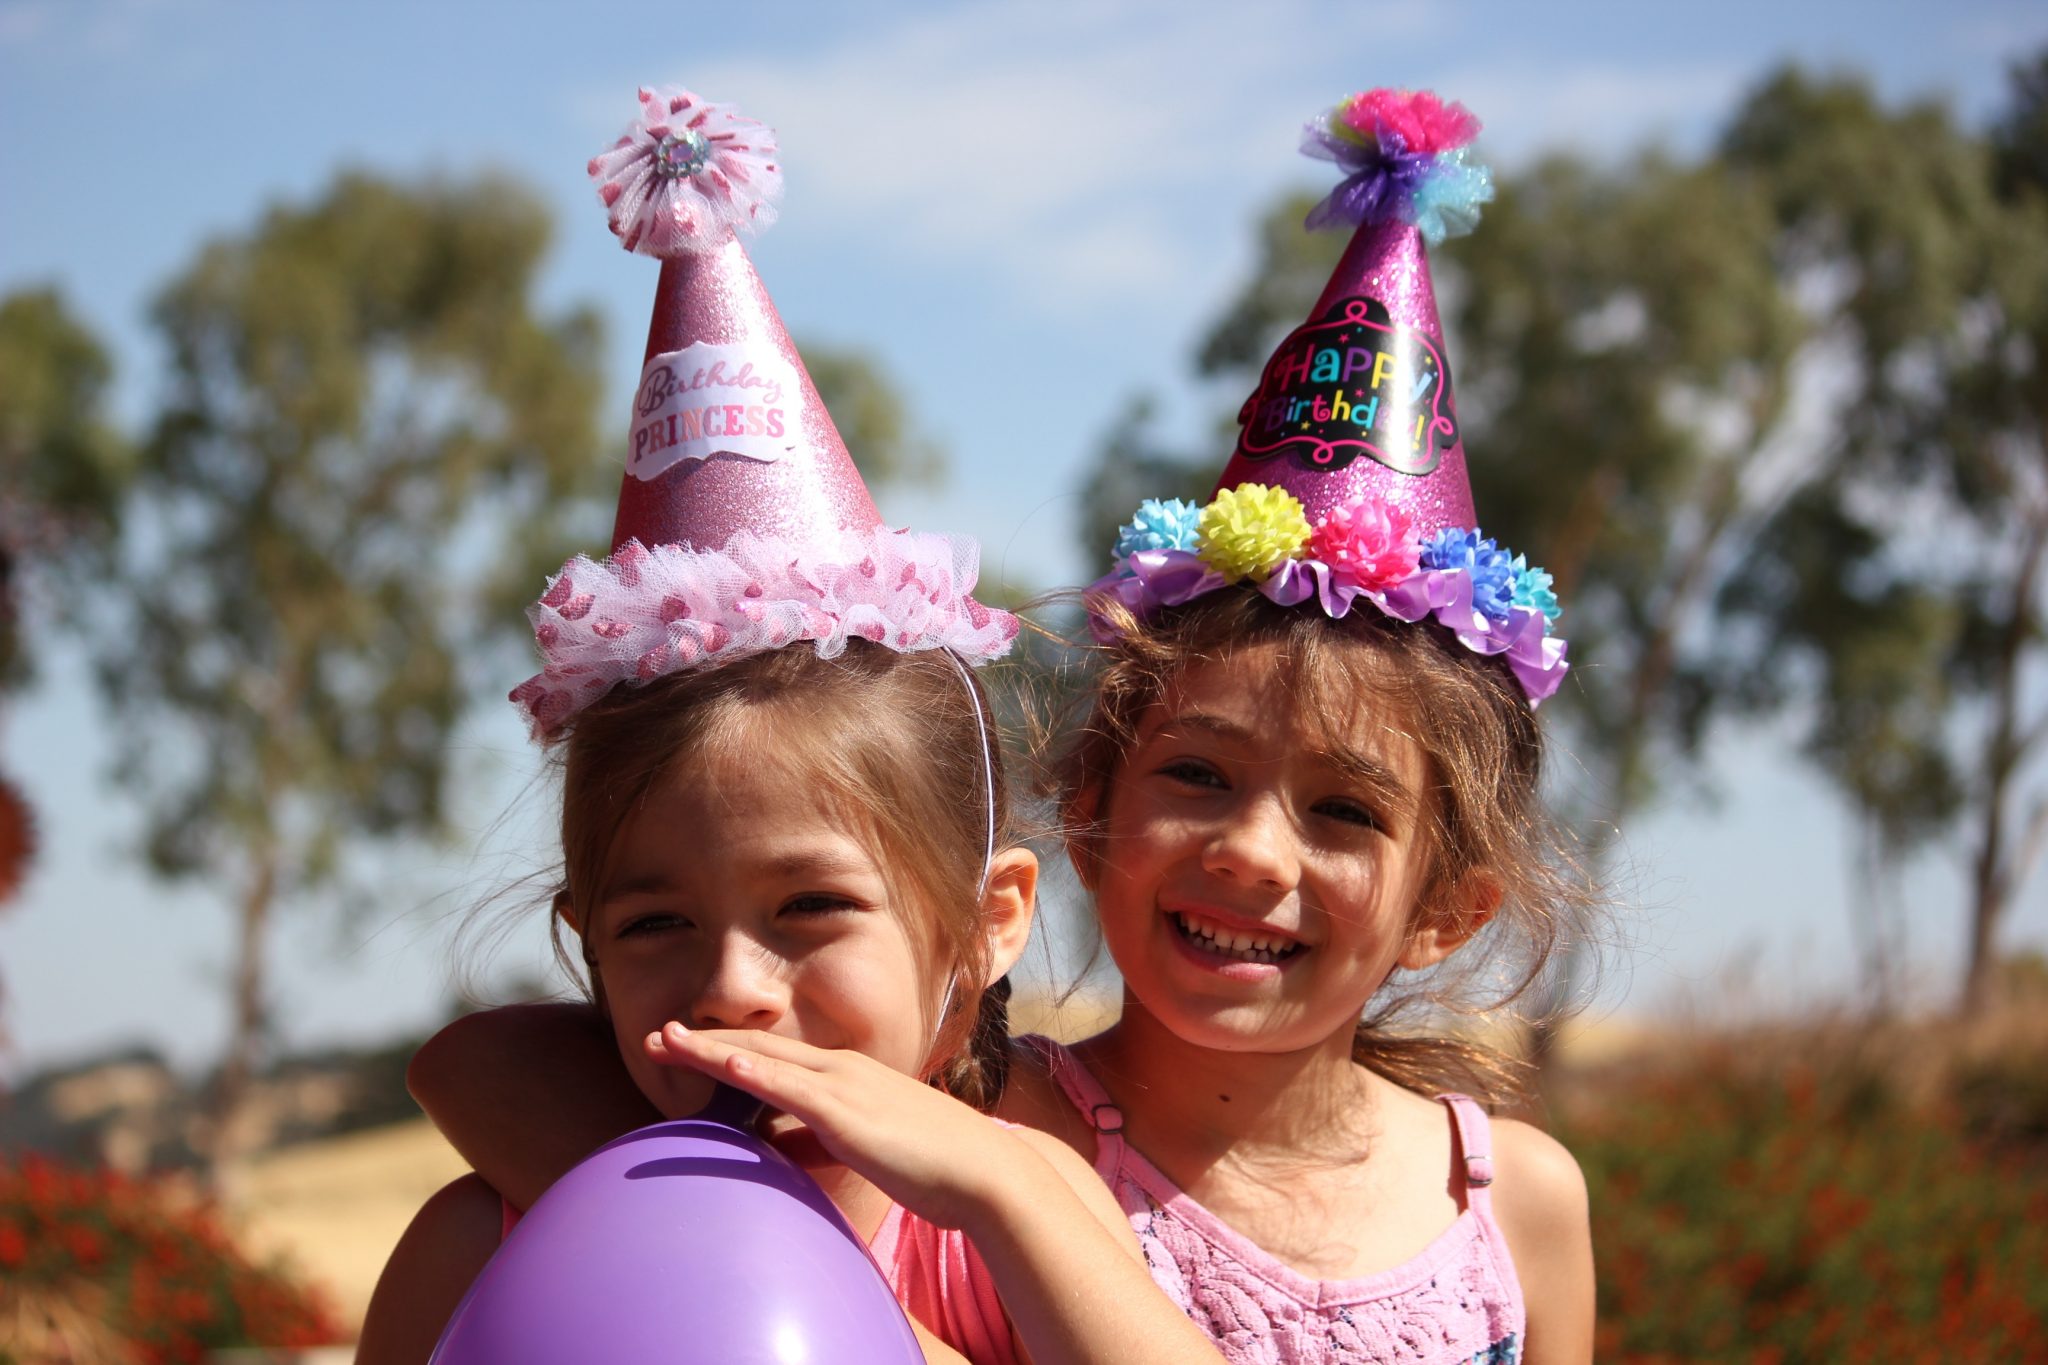 two girls in party hats one blowing up a purple balloon, outside in the sun